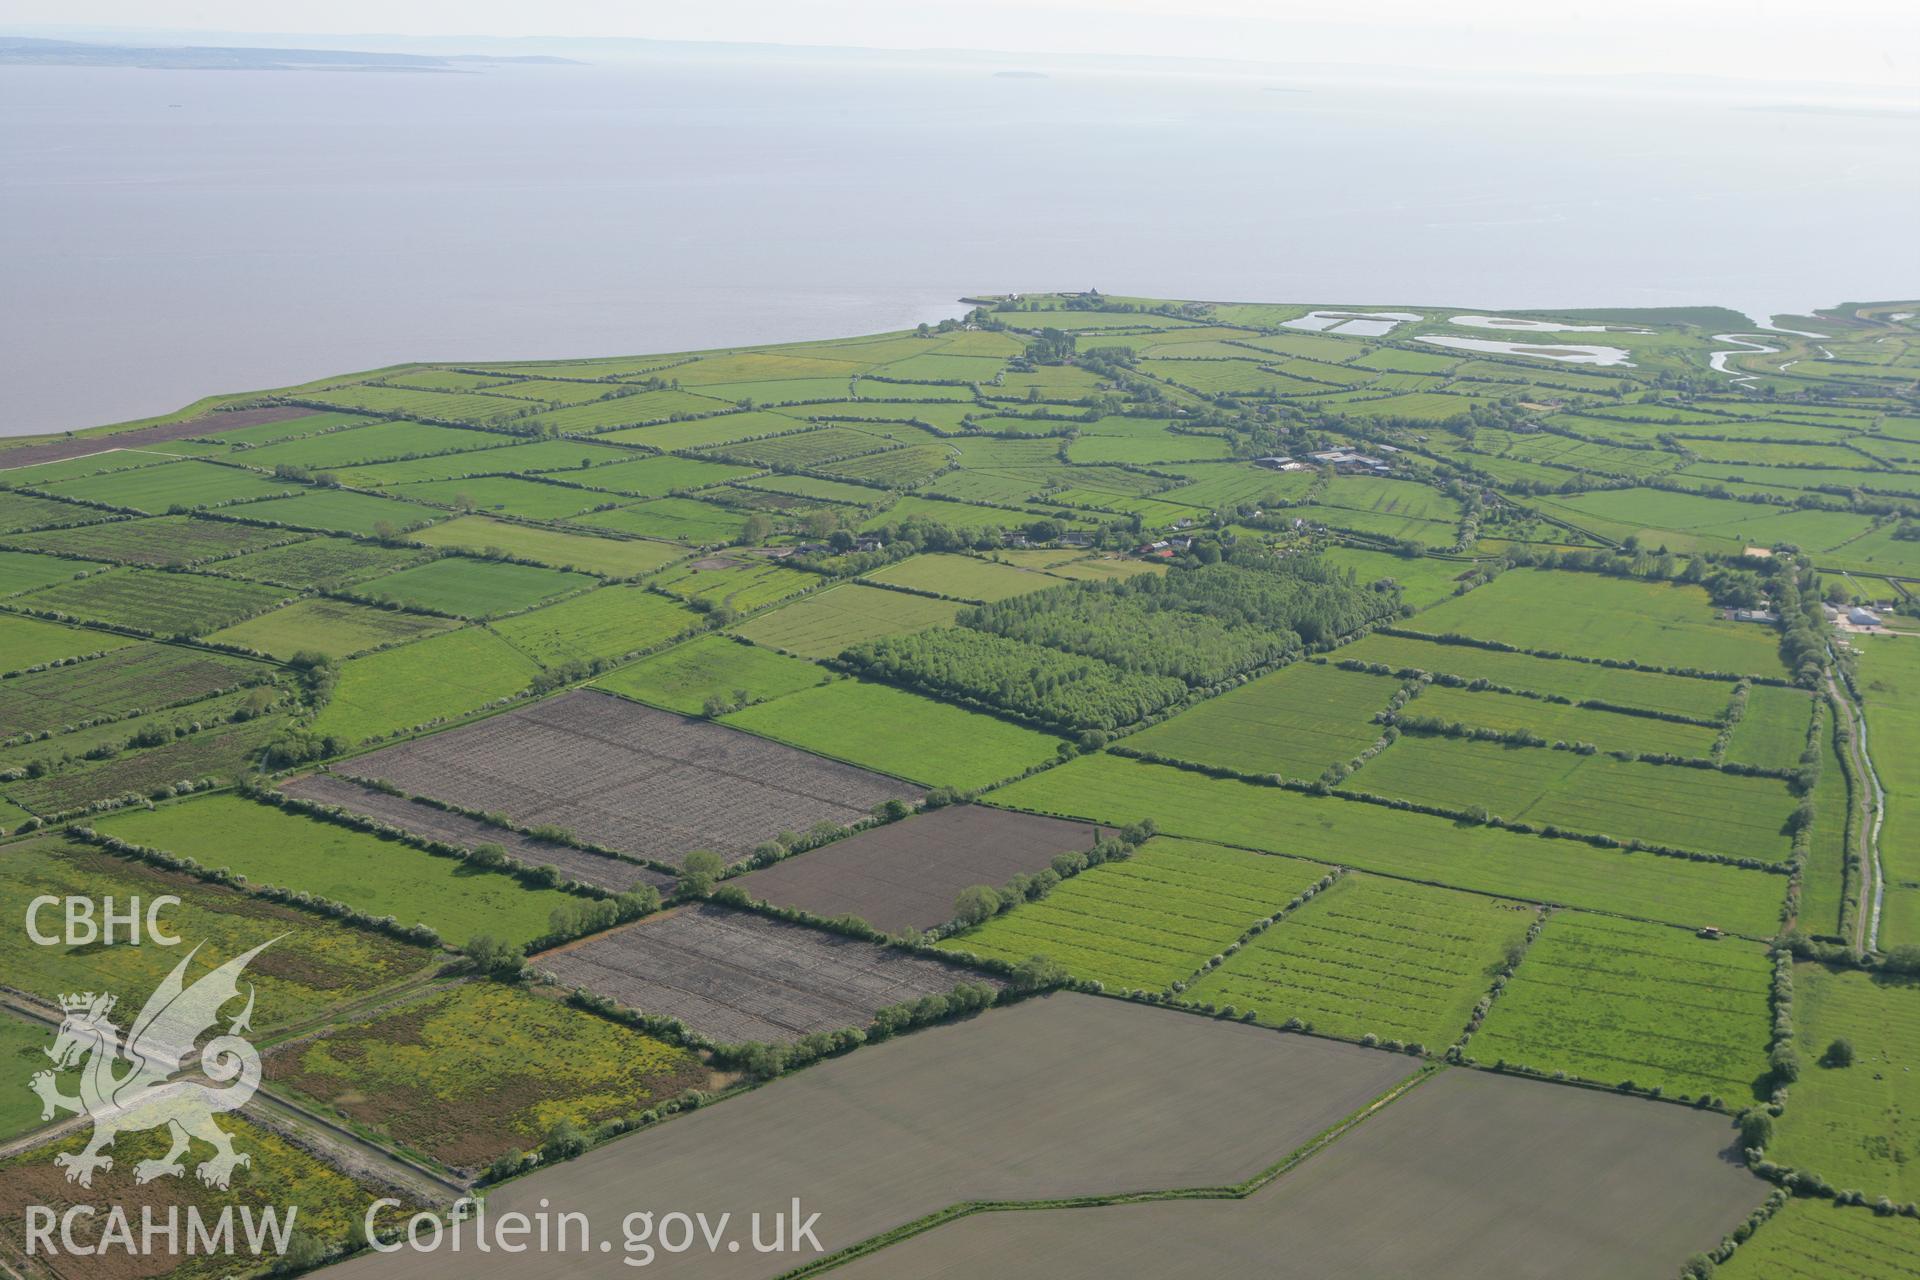 RCAHMW colour oblique photograph of Caldicot Levels looking south-west towards Goldcliff Priory. Taken by Toby Driver on 24/05/2010.